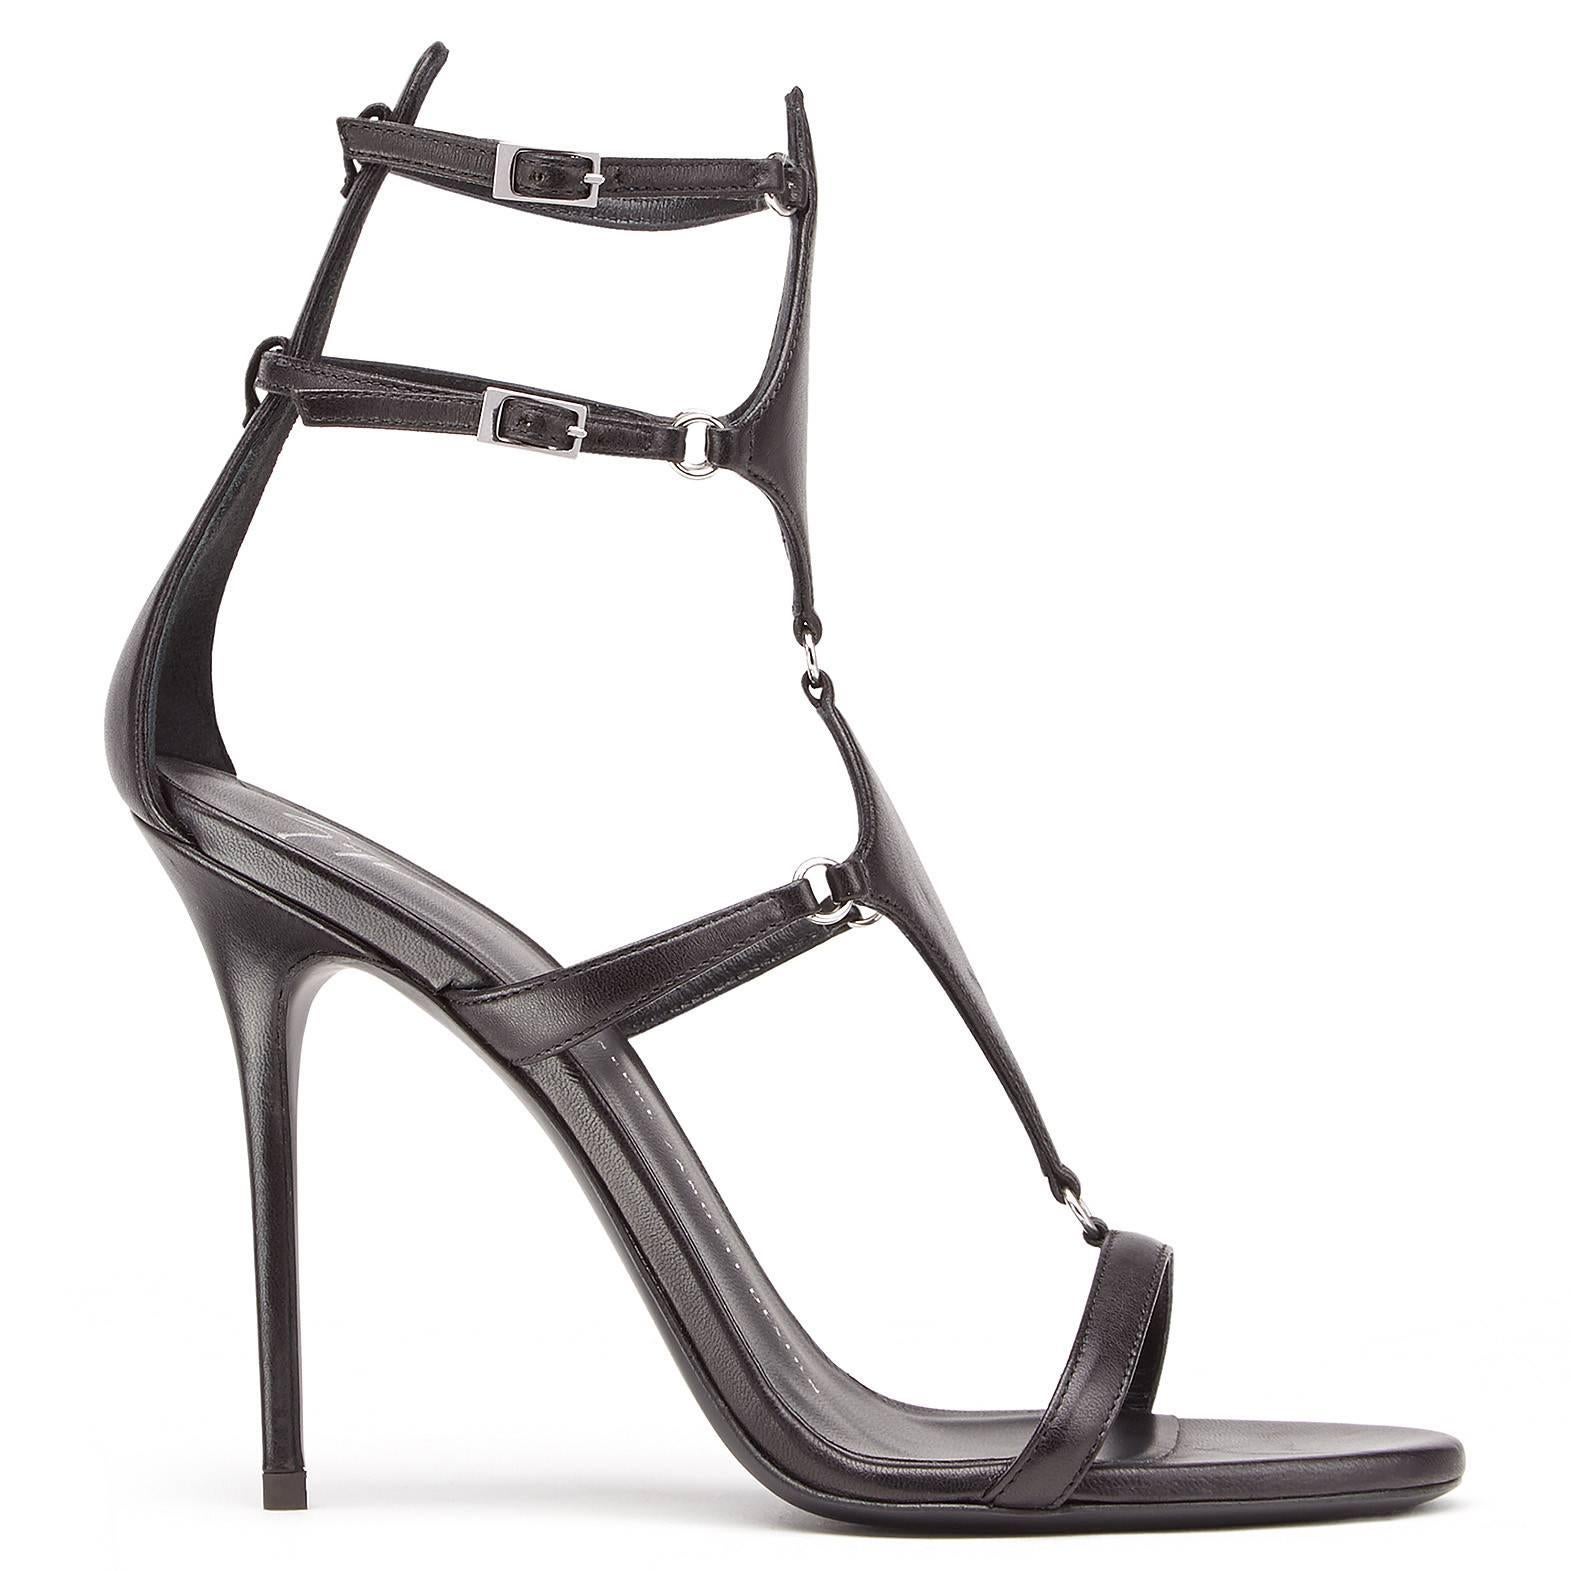 Women's Giuseppe Zanotti New Black Leather Cut Out Strappy Evening Sandals Heels in Box